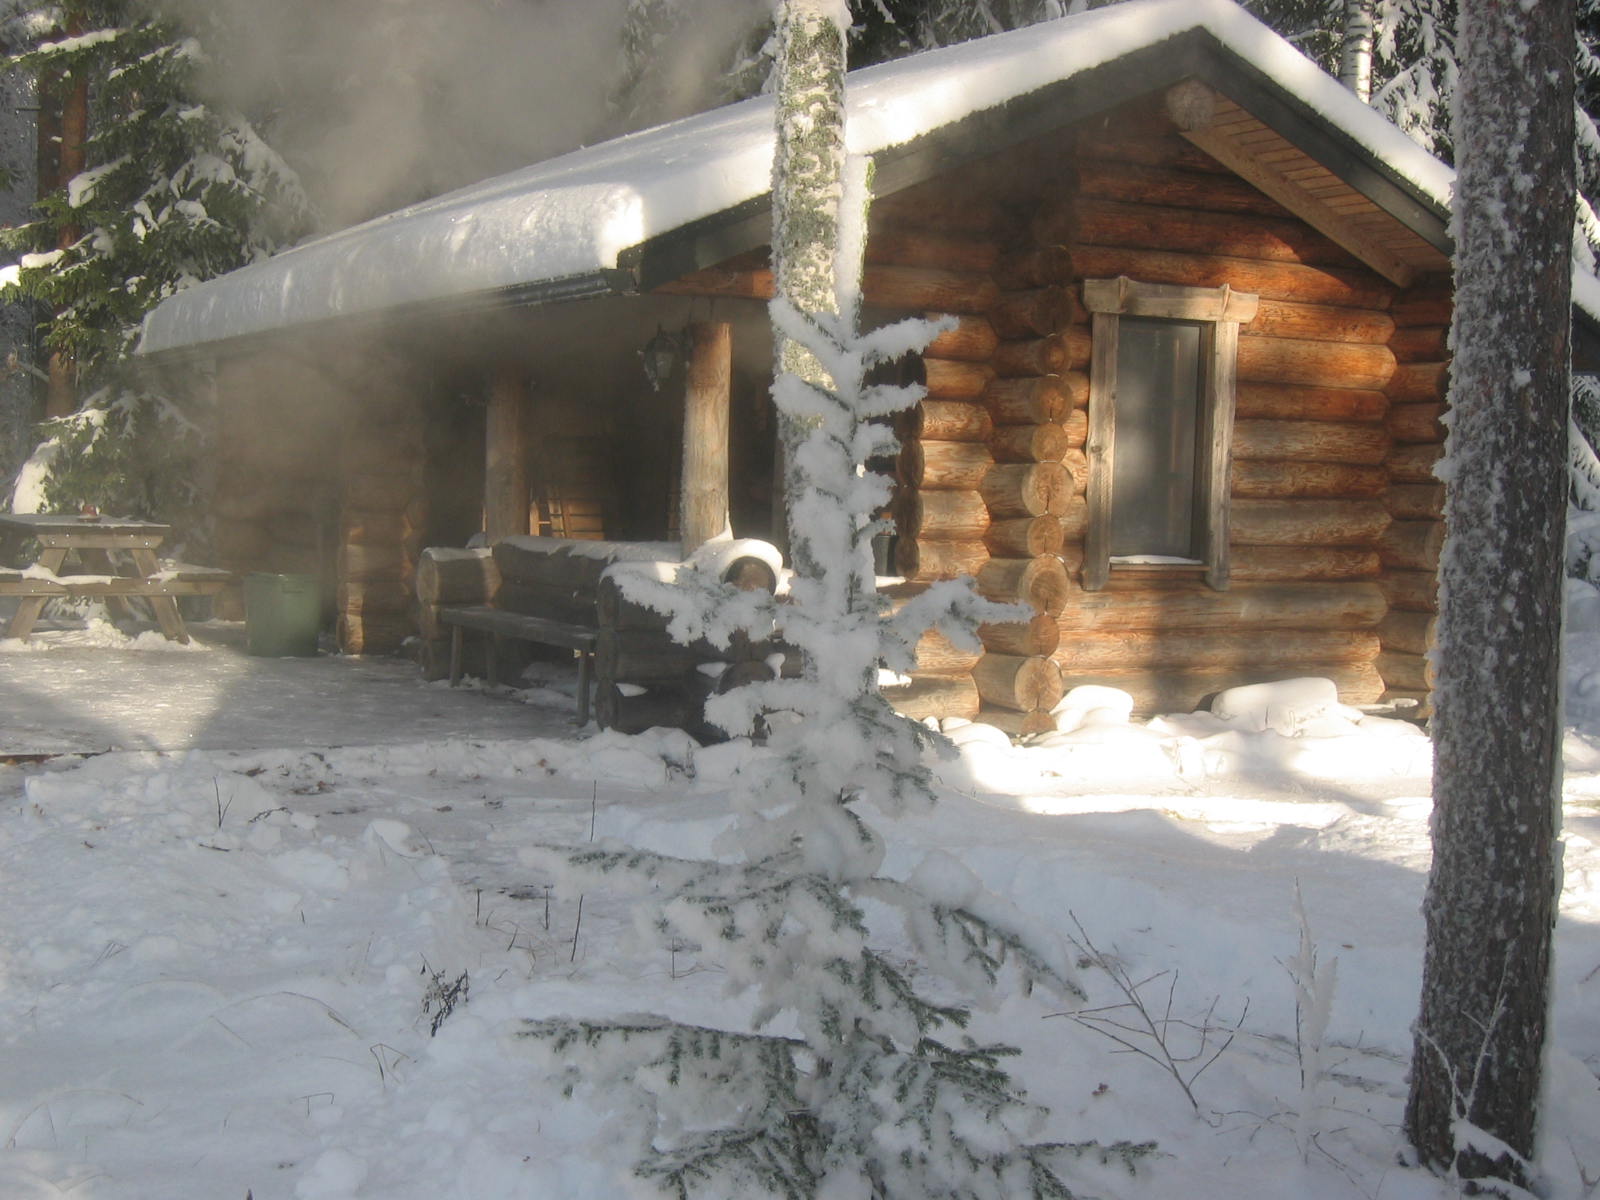 A smoke sauna made of round logs in a snowy forest.